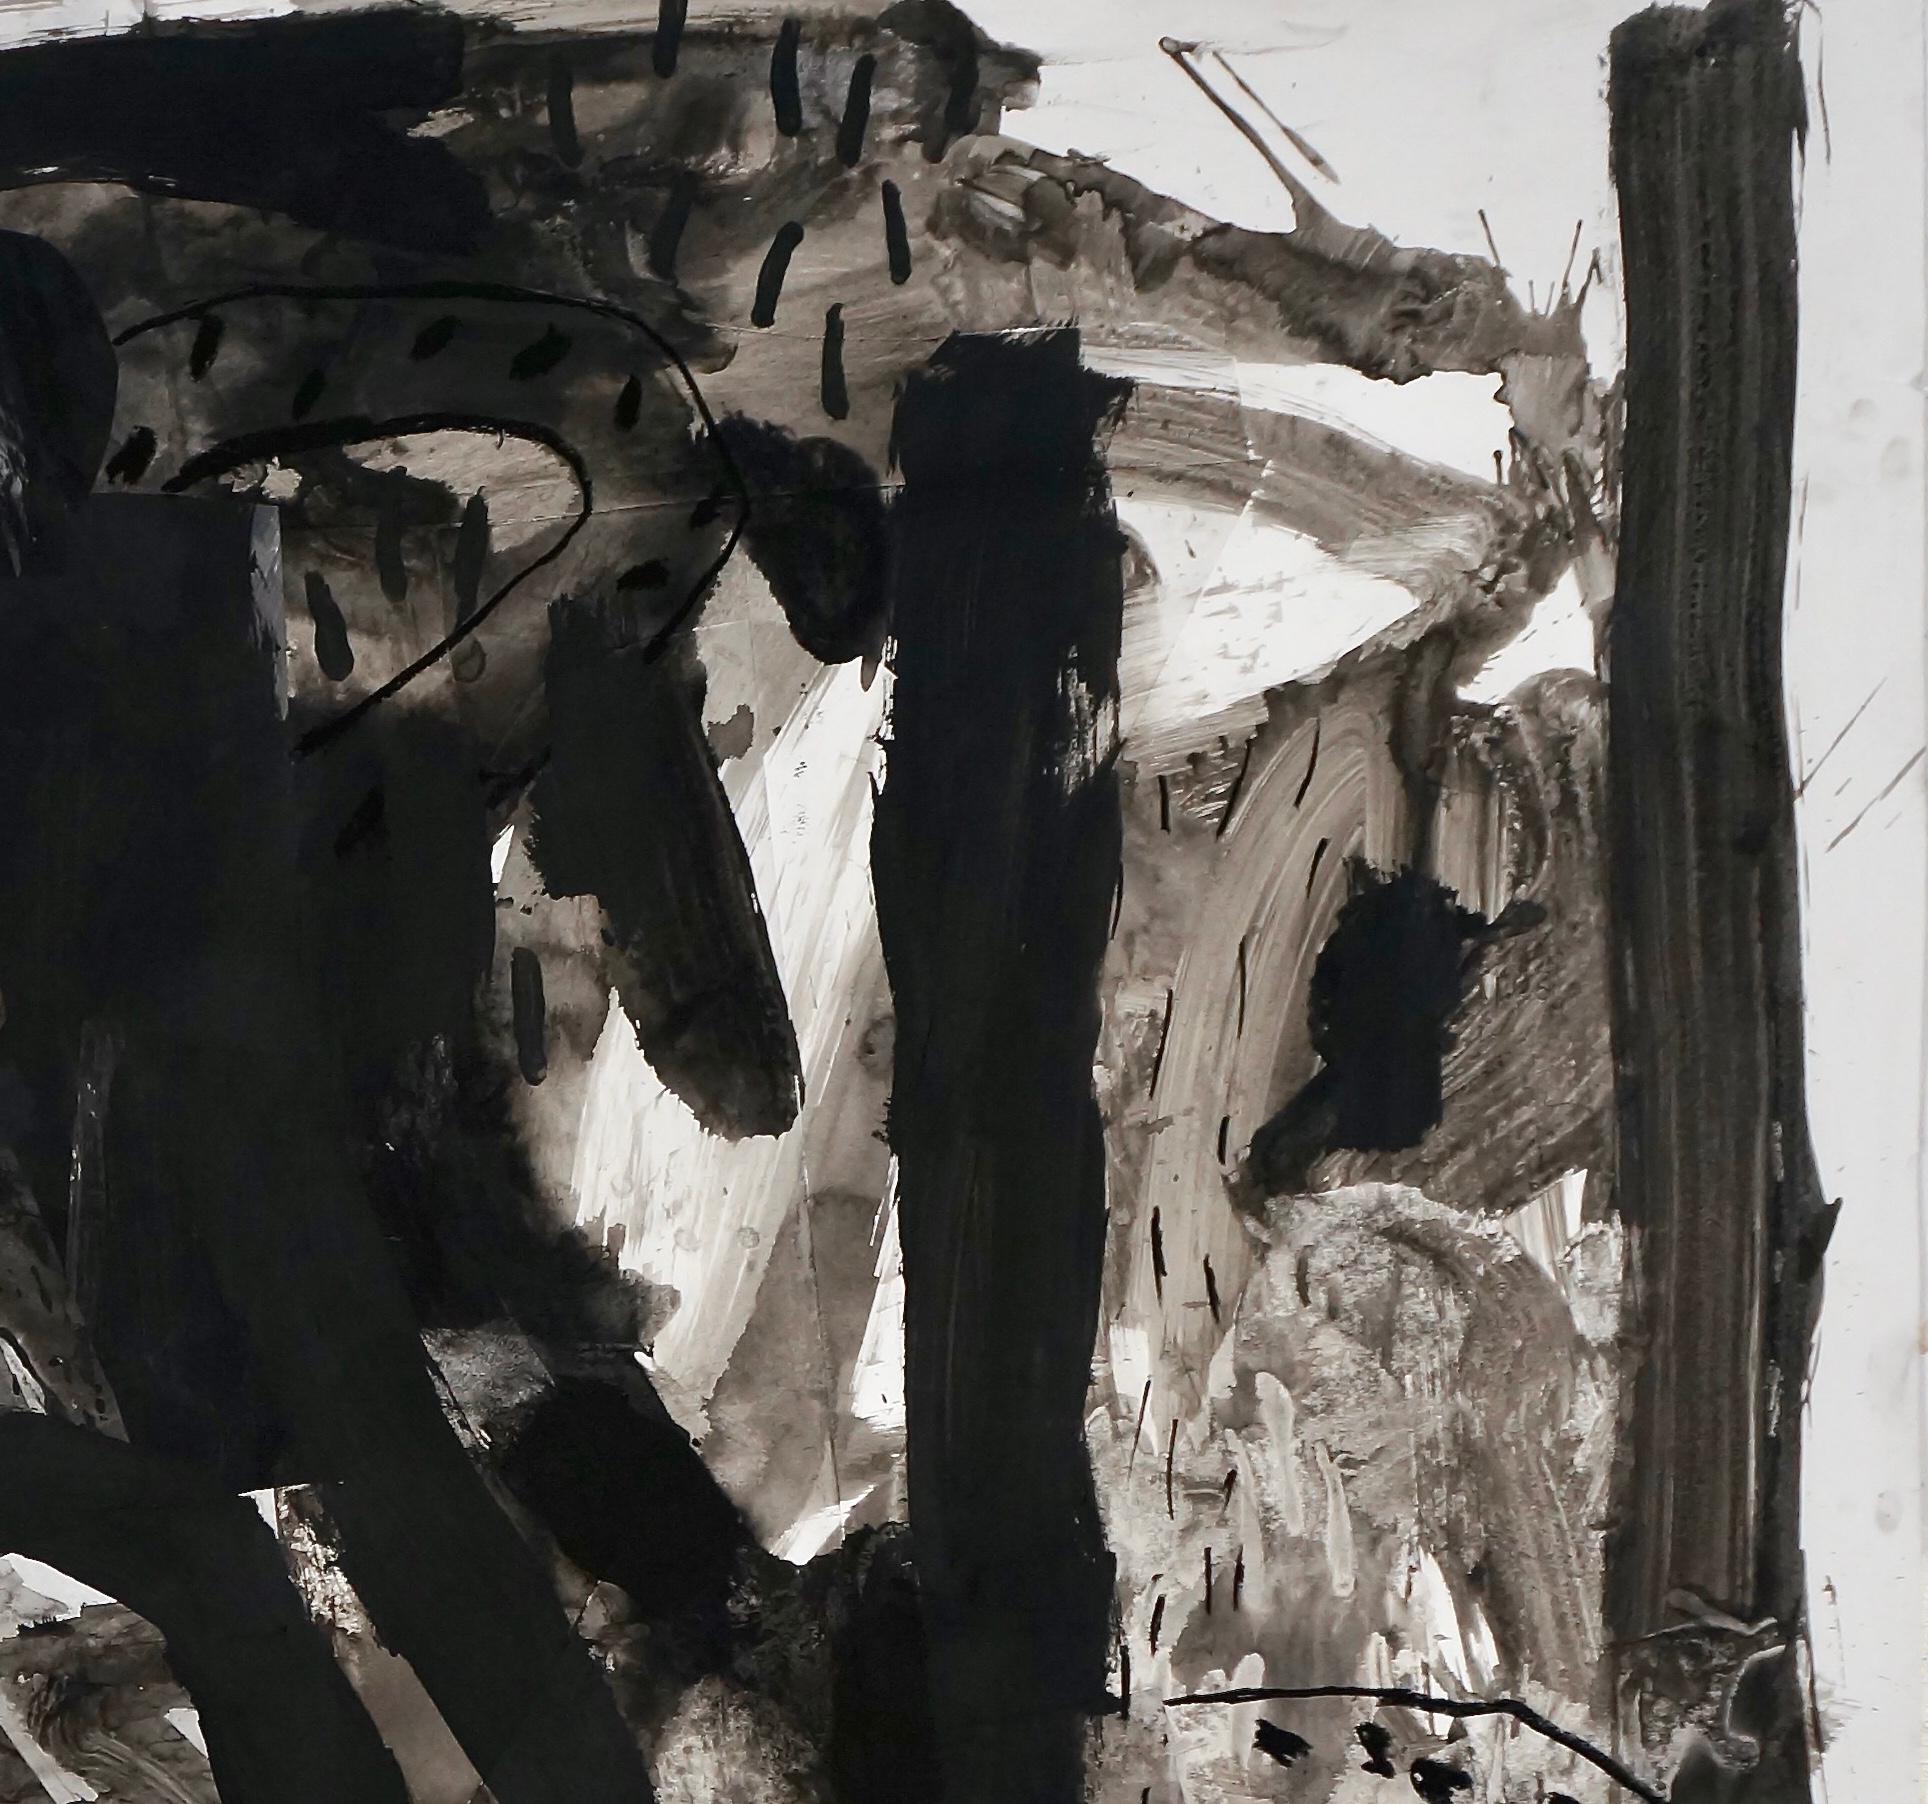 This sizable work on paper is an achromatic mixed media collage and painting. The lack of color serves to emphasize the abstract expressiveness of the mark-making, in addition to the tactility of the layers of material adhering to the